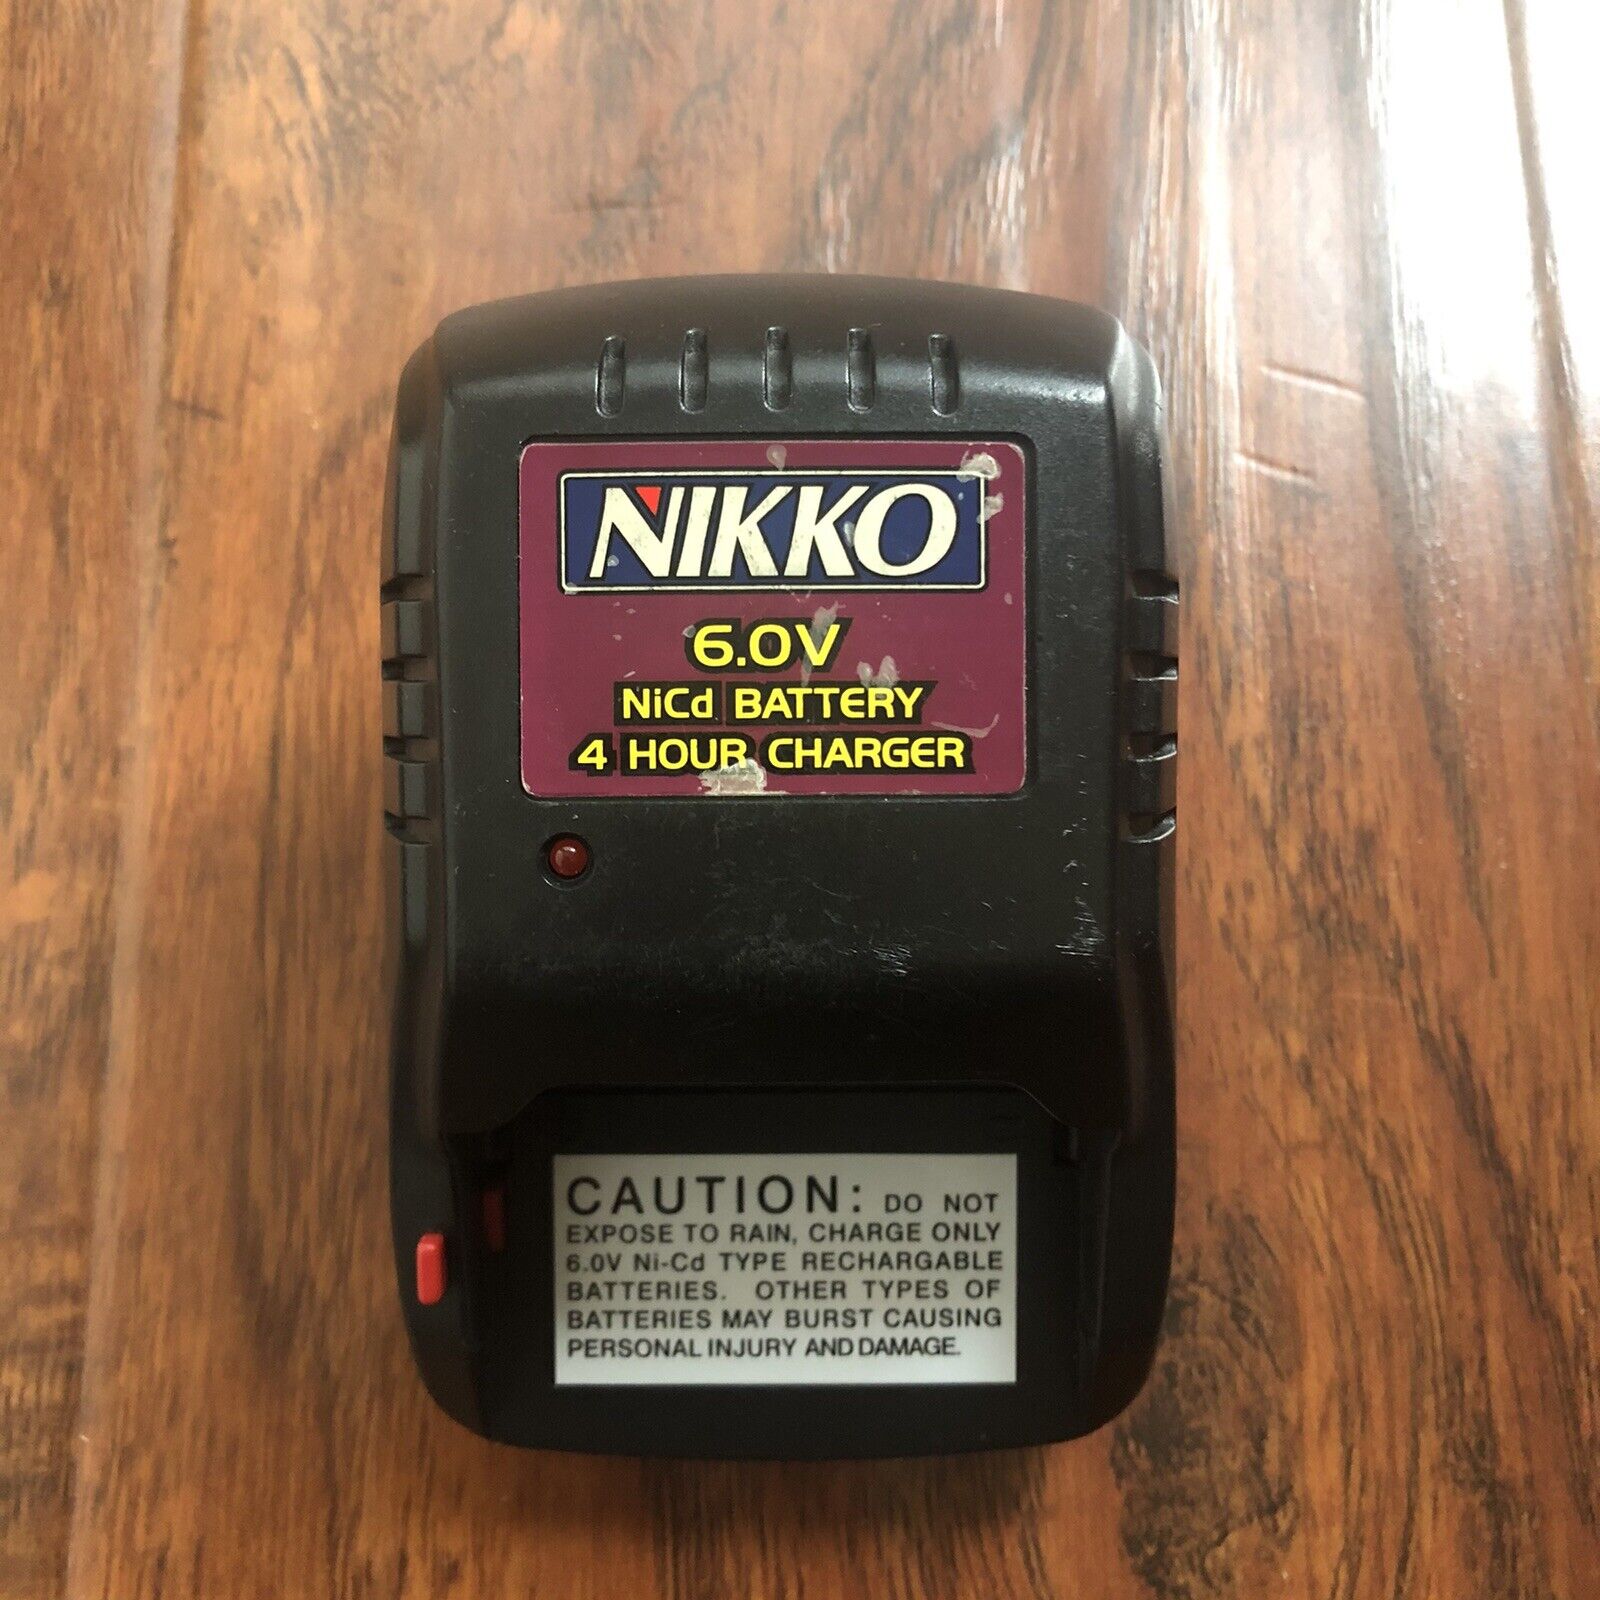 Nikko 6.0V Volt NiCd 4 Hour R/C Battery Charger Untested